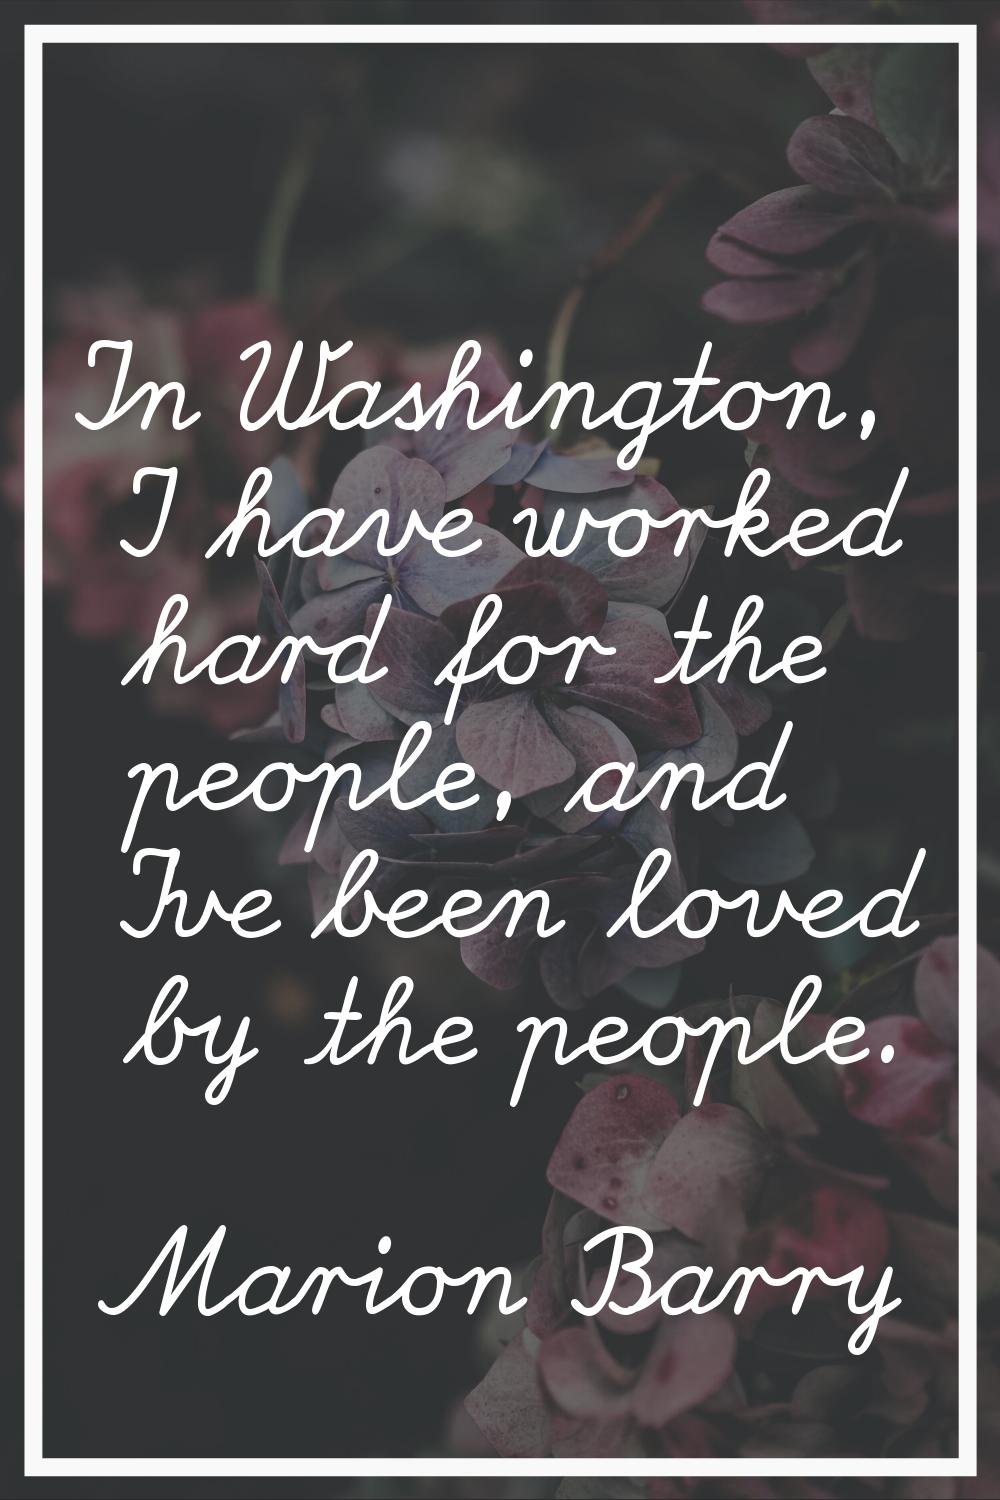 In Washington, I have worked hard for the people, and I've been loved by the people.